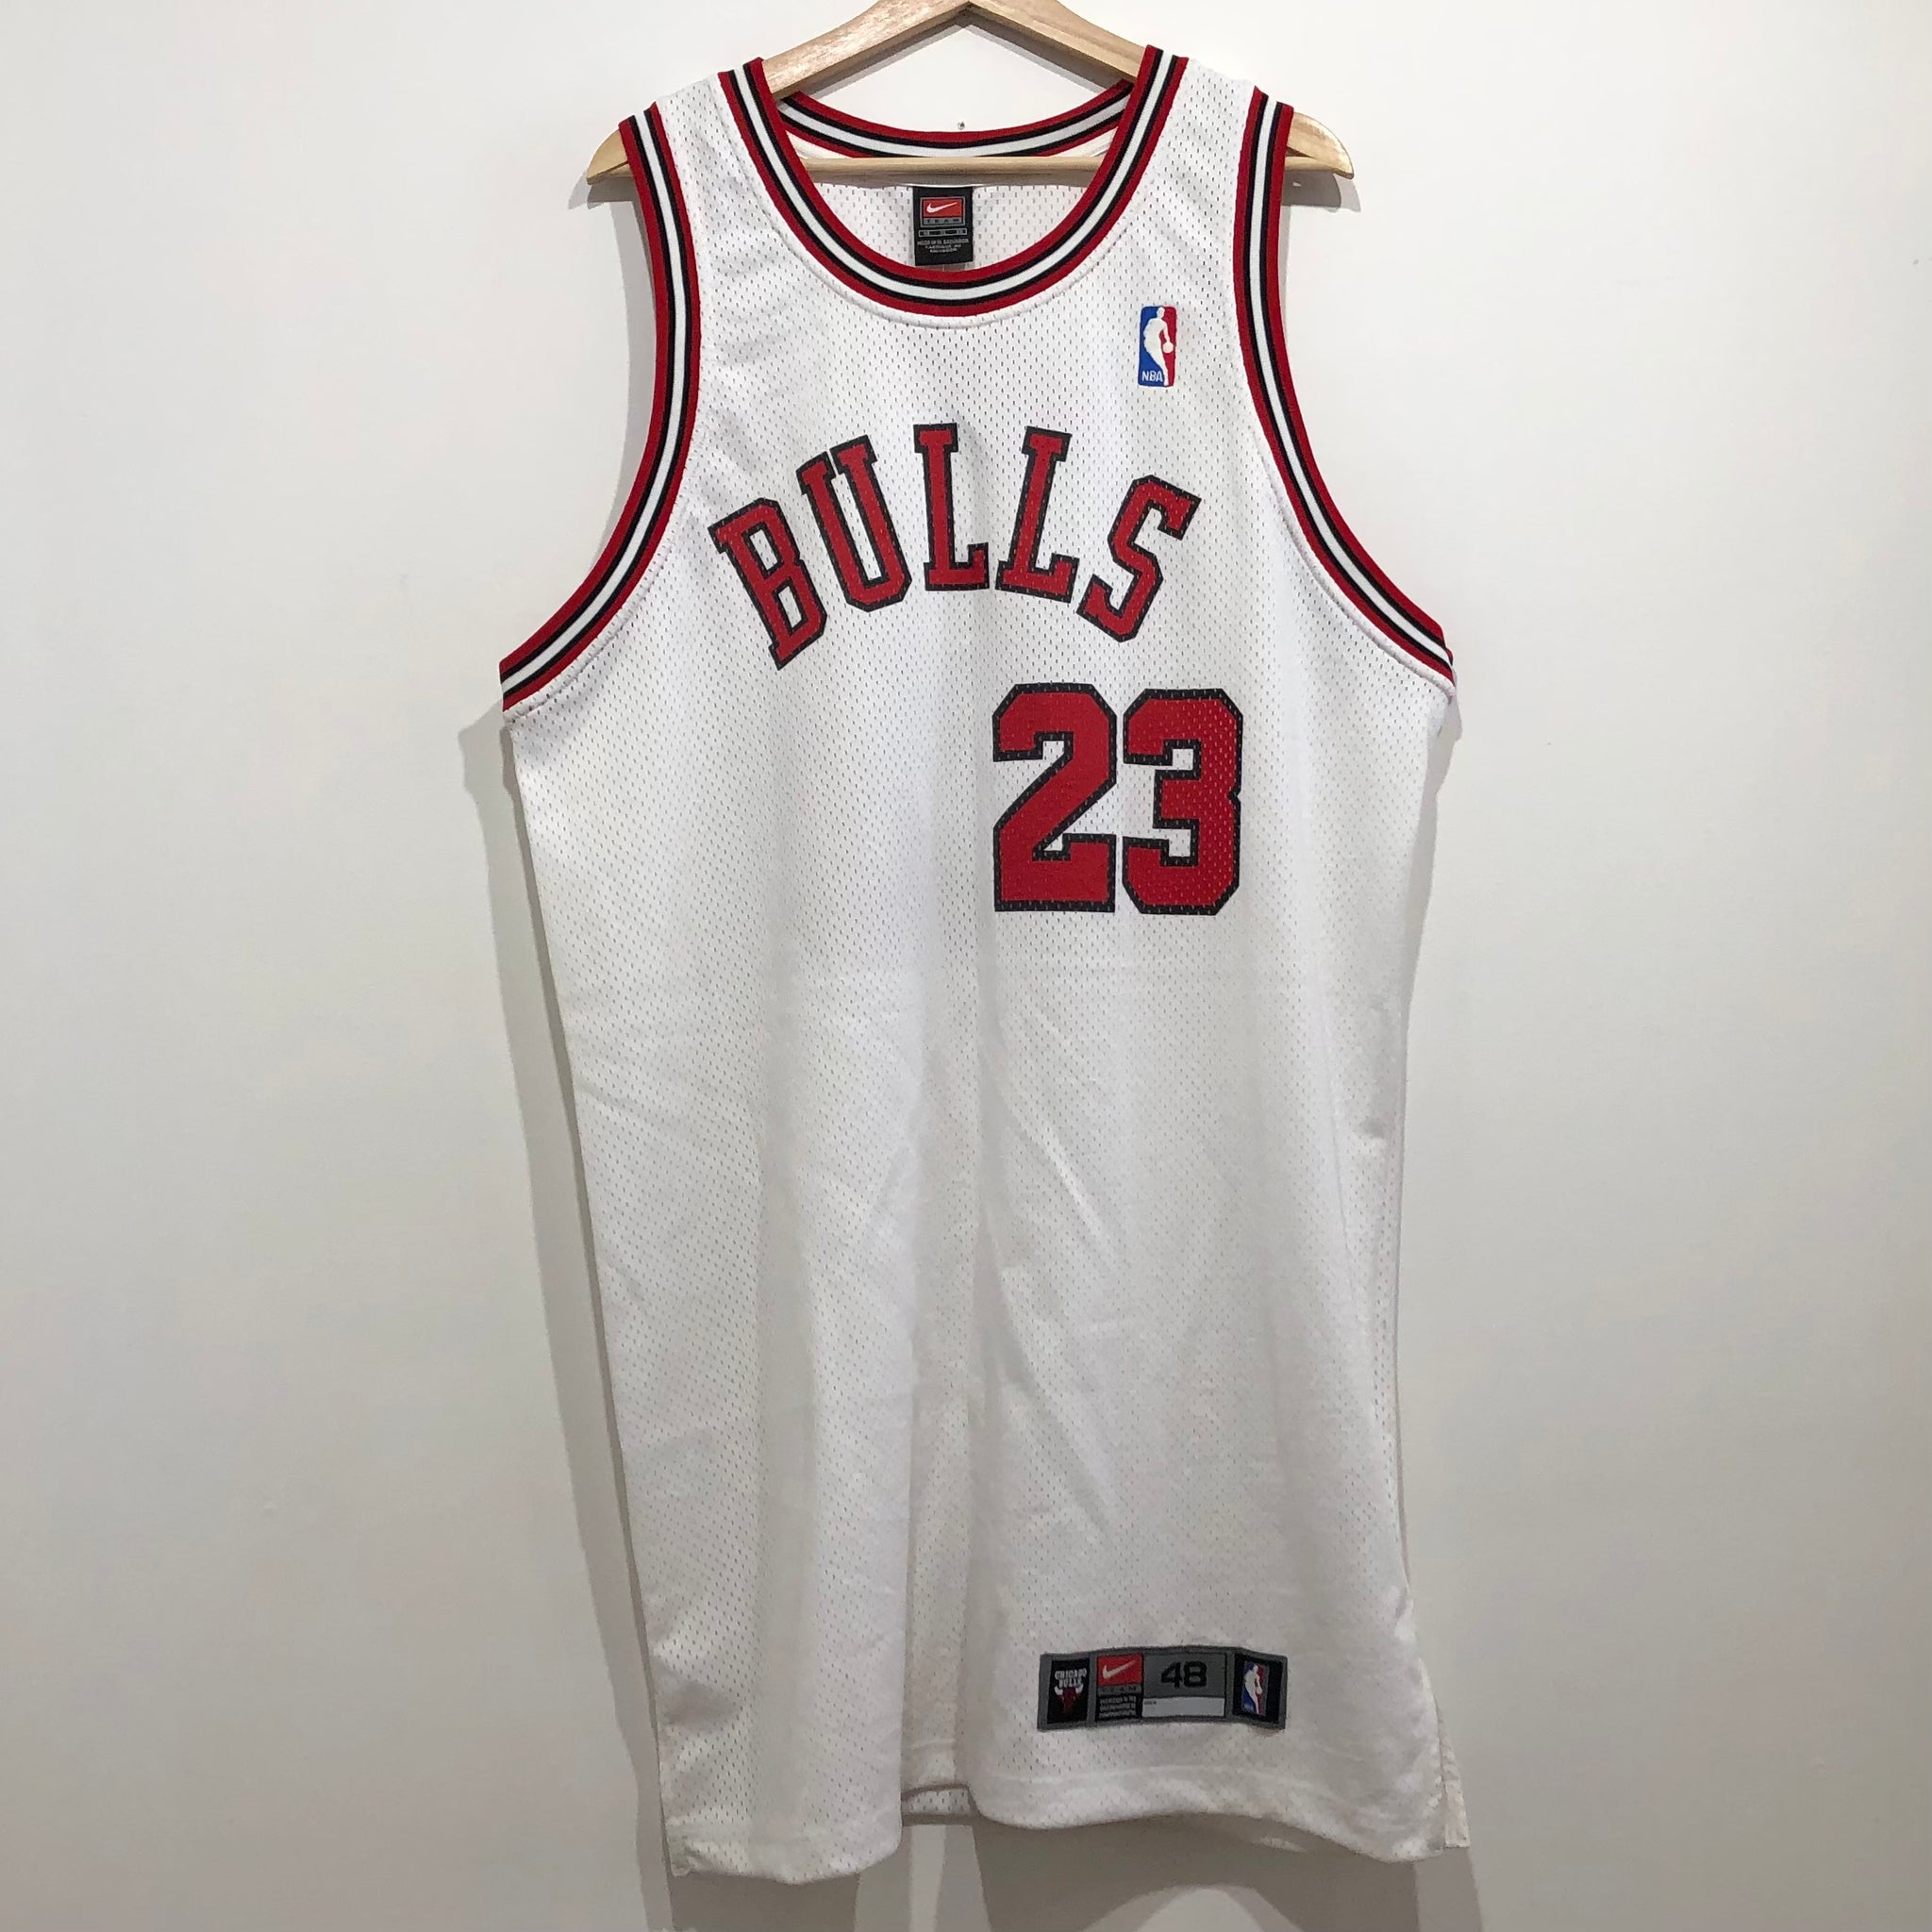 Official Chicago Bulls Authentic Jerseys, Official Nike Jersey